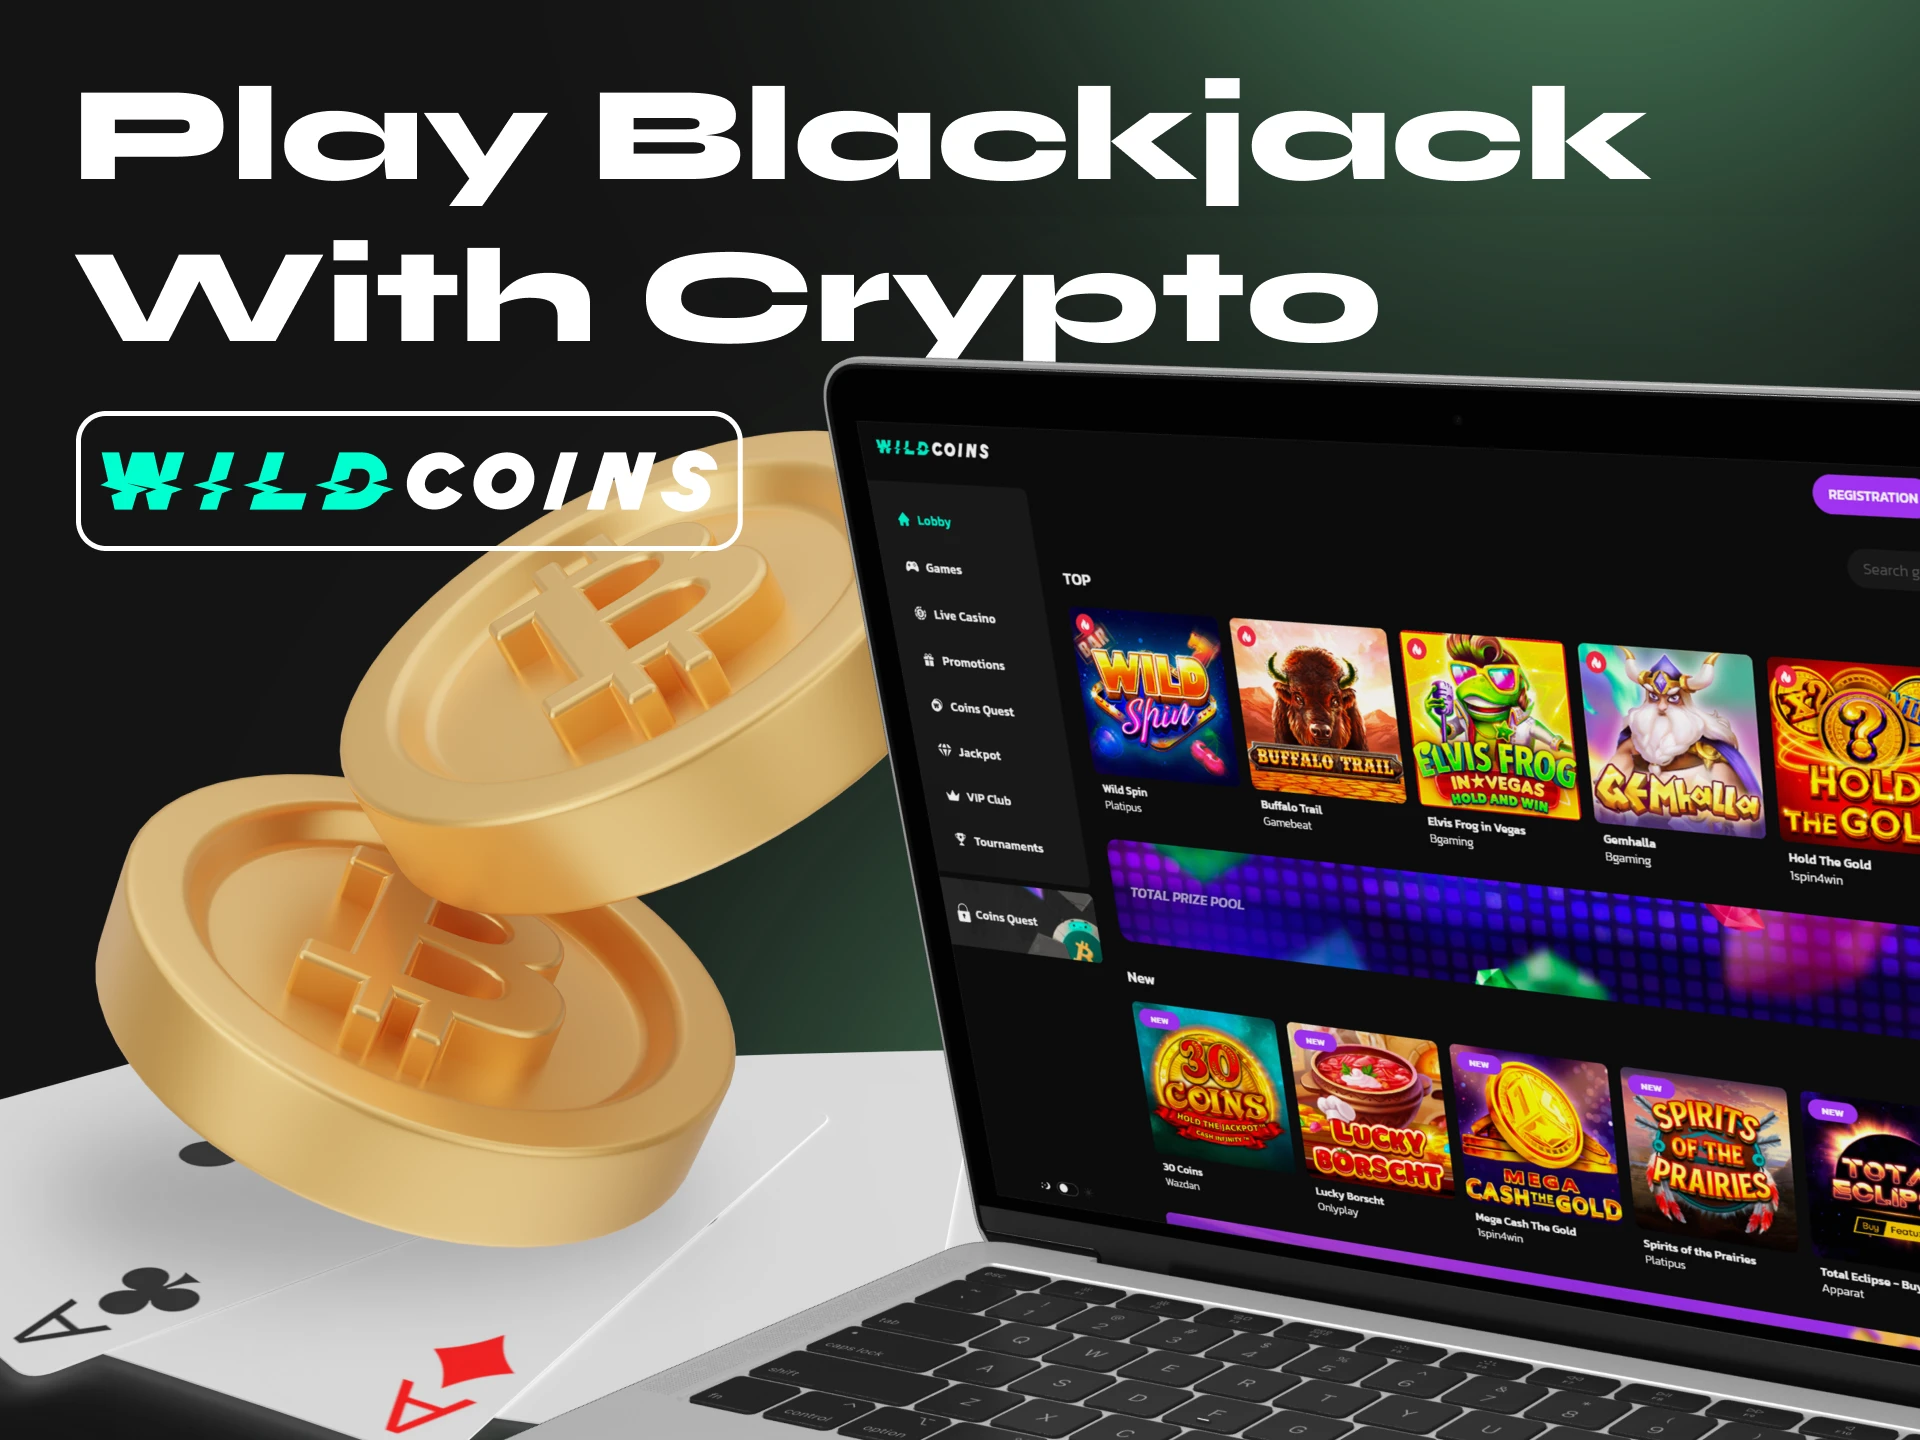 Play blackjack with cryptocurrency on Wildcoins.